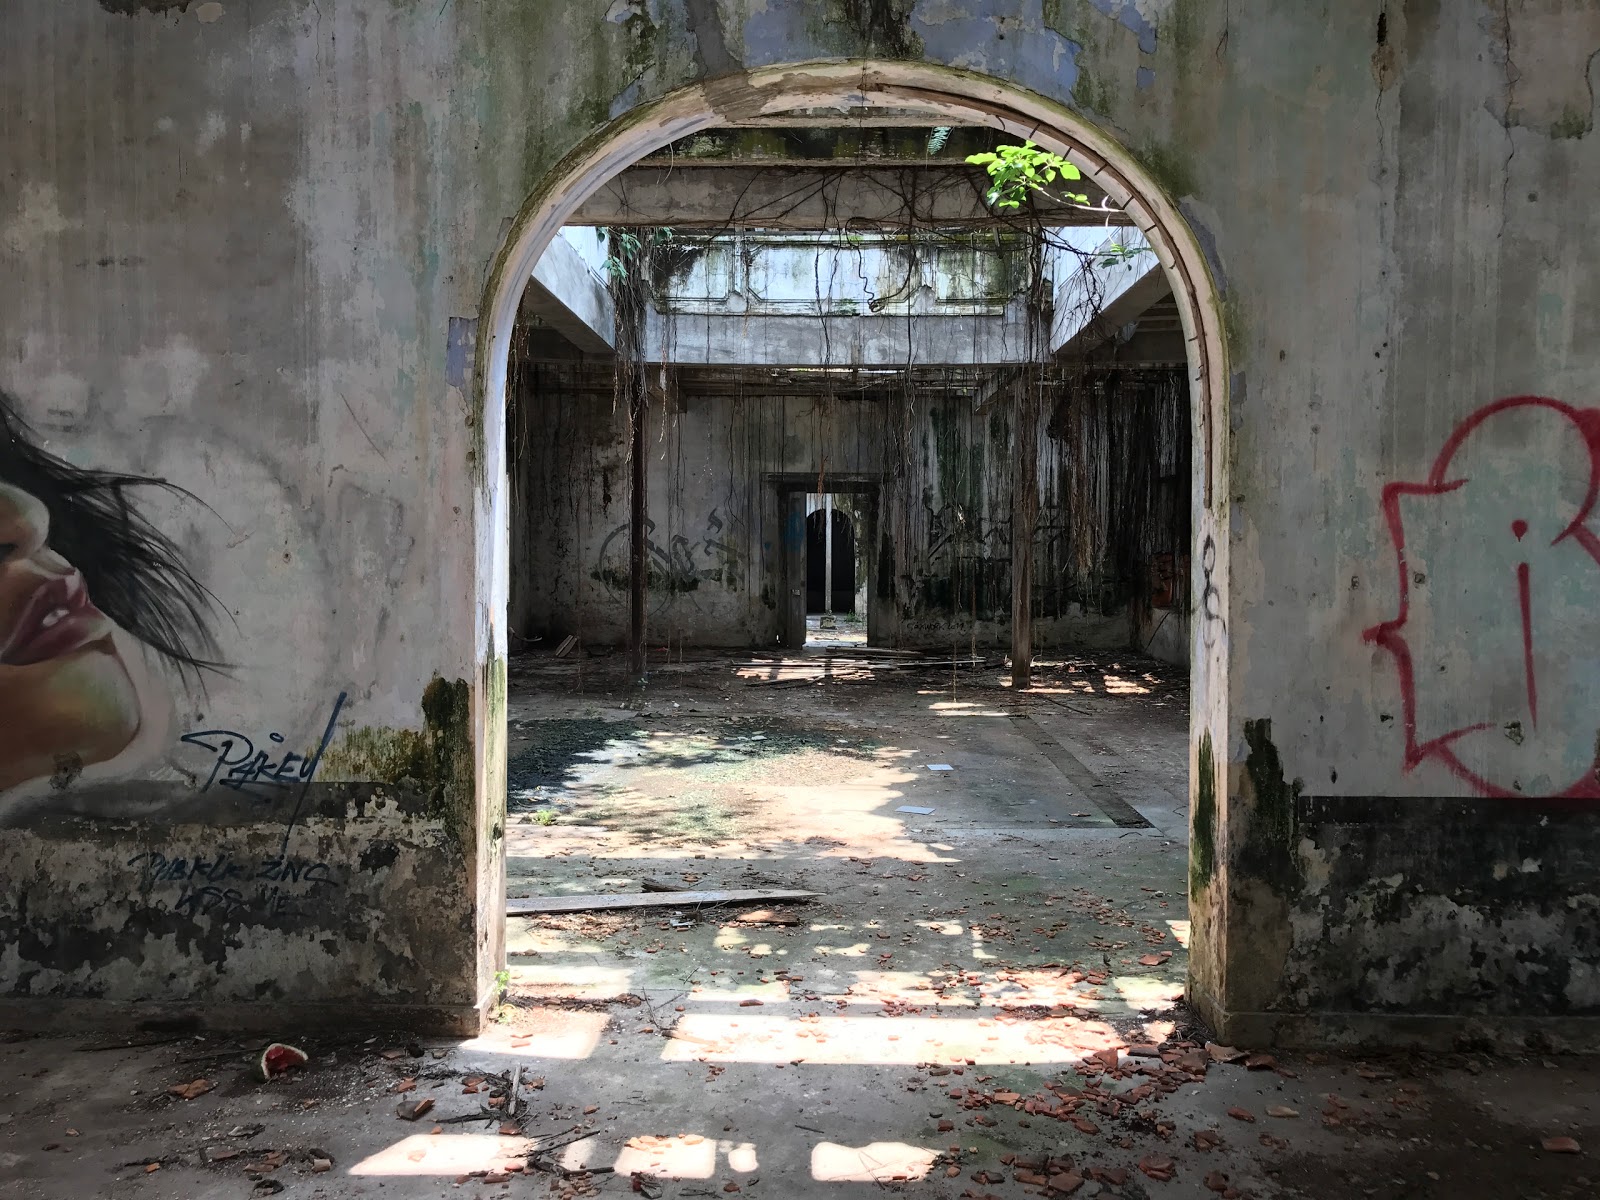 URBAN ARCHITECTURE NOW: ABANDONED BUILDING IN MALACCA